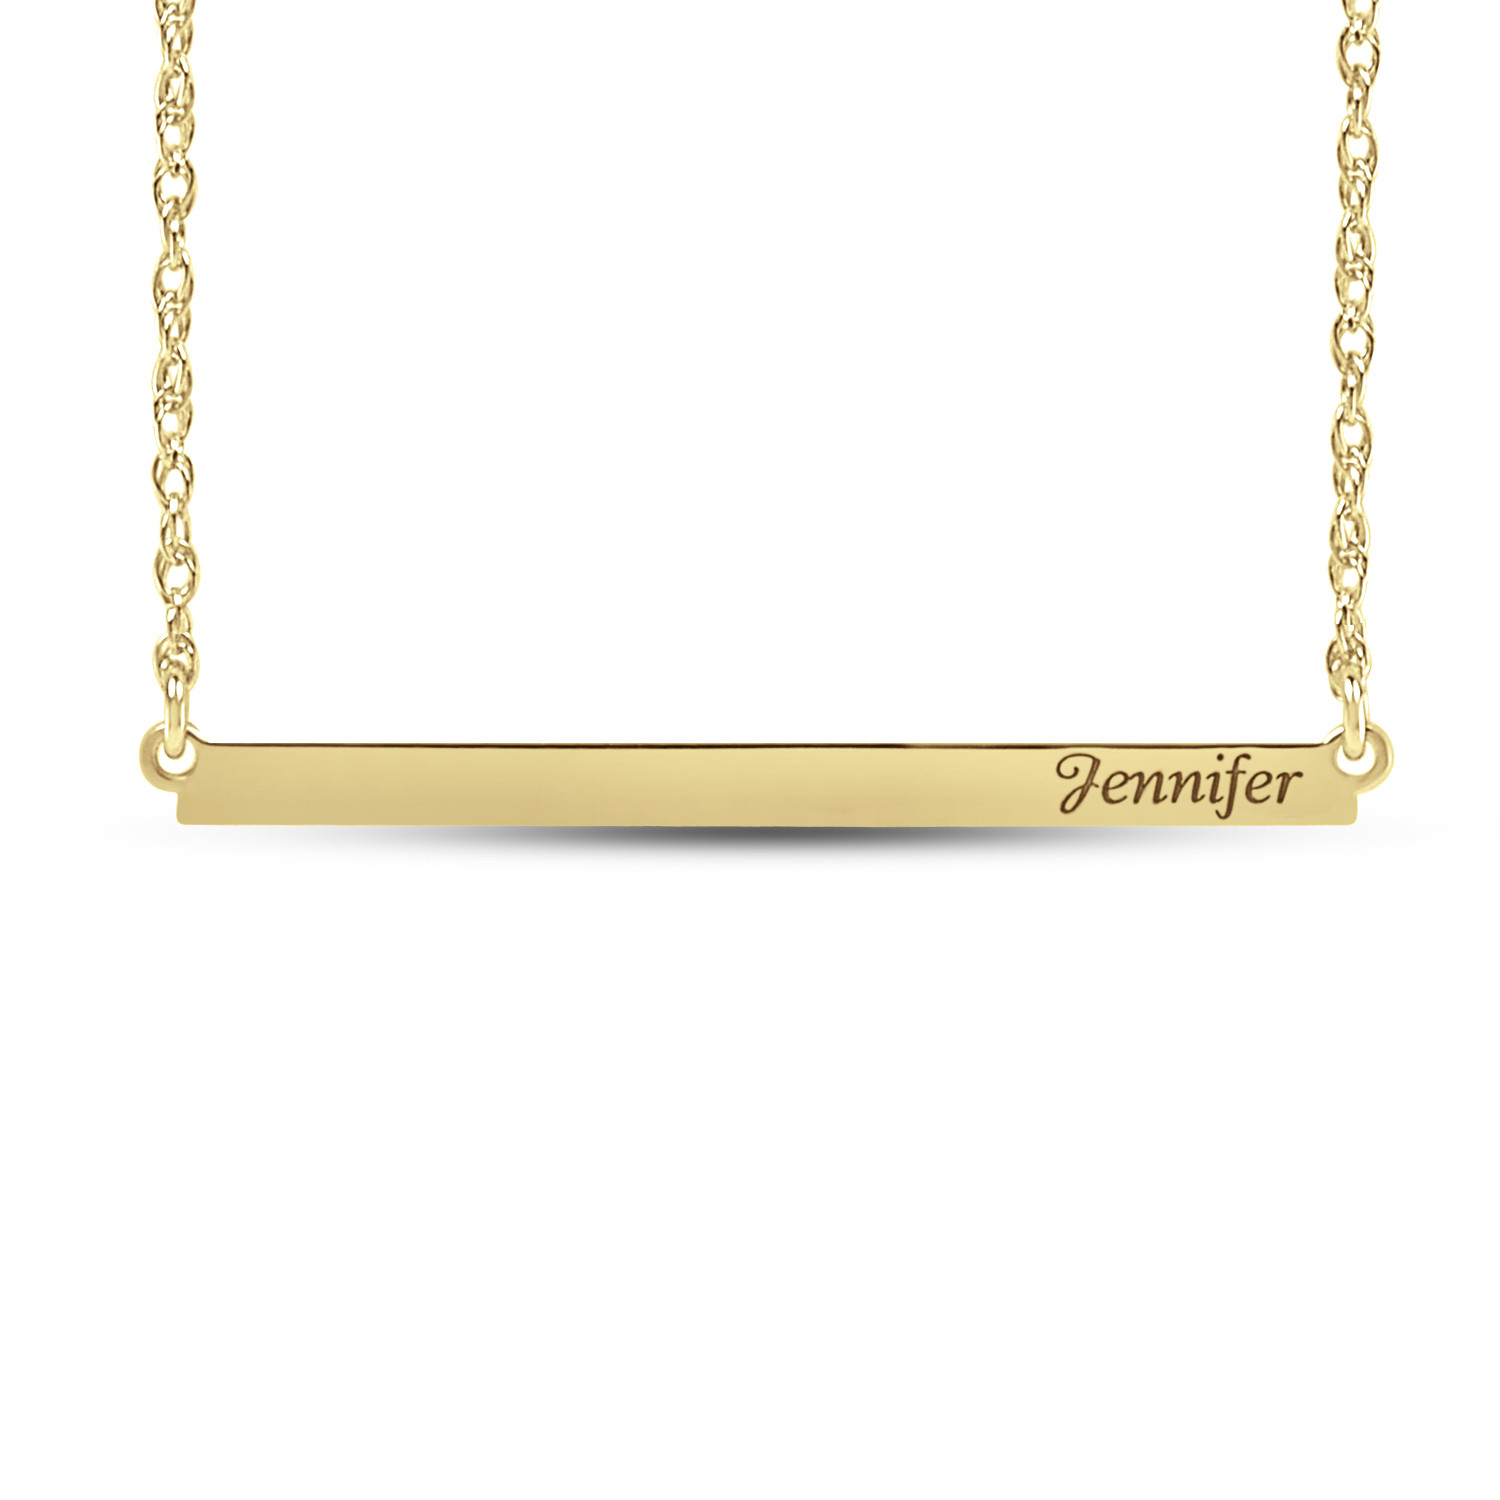 3 x 39mm Personalized Bar Name Necklace 